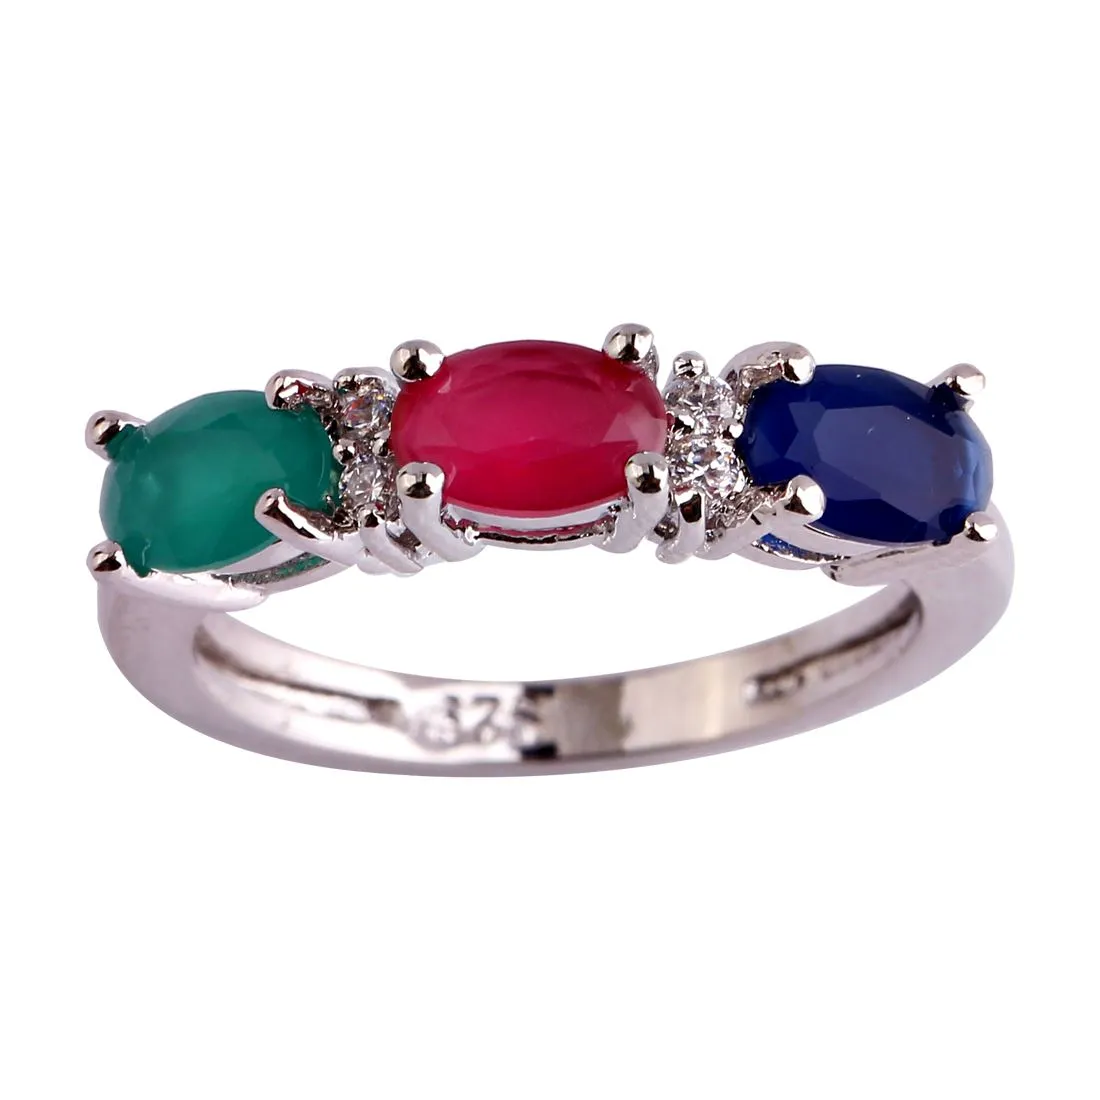 Jewelry Lab Ruby Emerald Sapphire 18K White Gold Plated Silver Fashion Ring Size 6 7 8 9 10 11 12 Free Shipping Wholesale